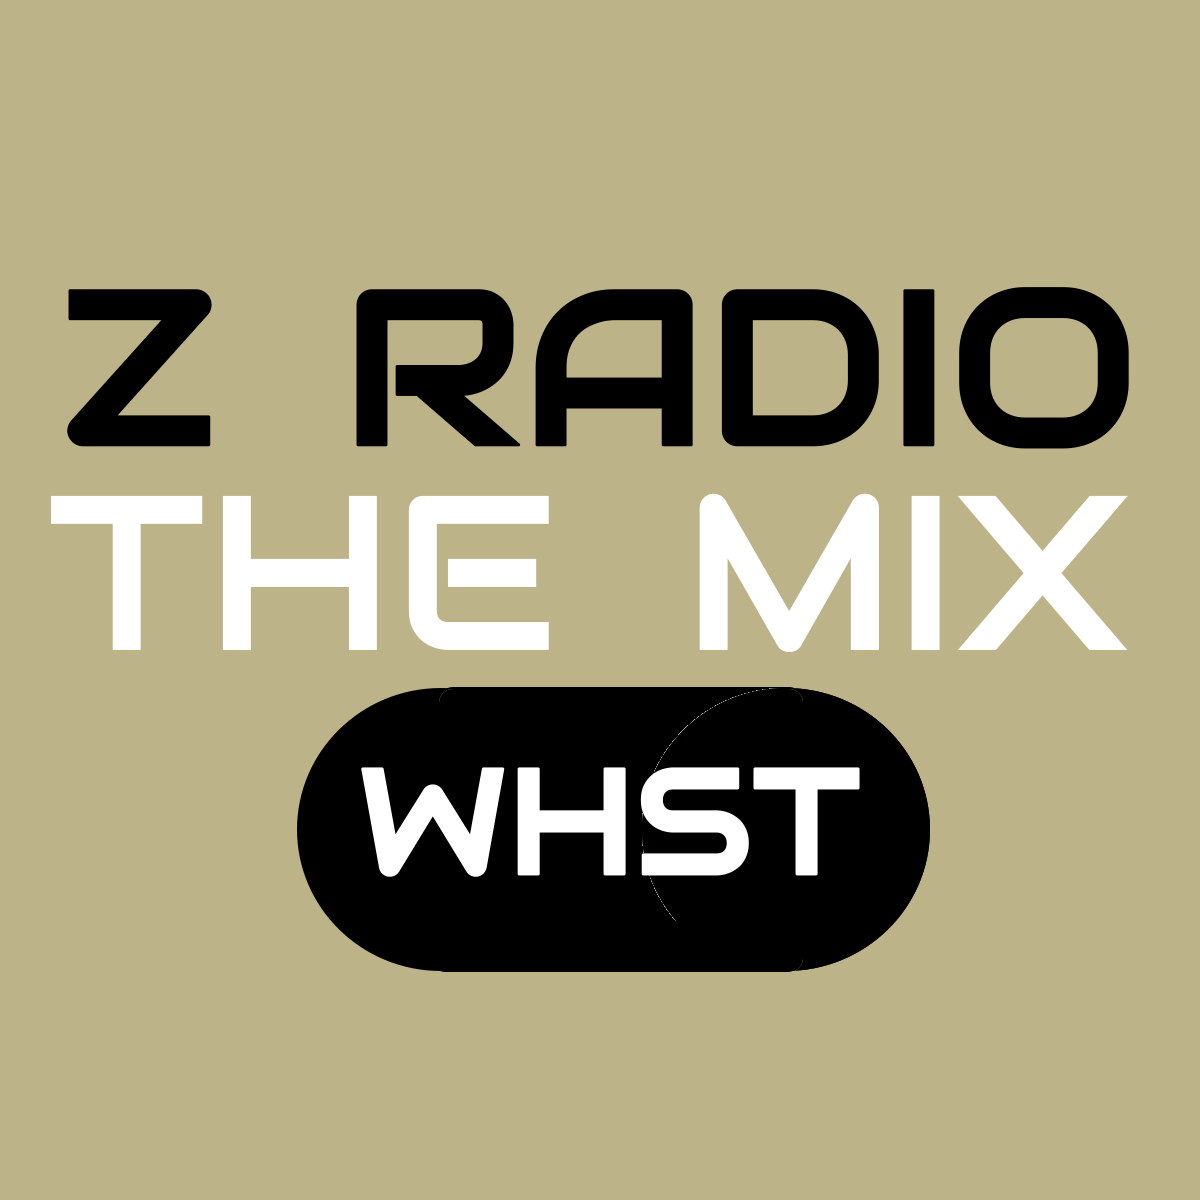 Art for Theres power in word speak love this is your life changing radio 1 by Z Radio The Mix